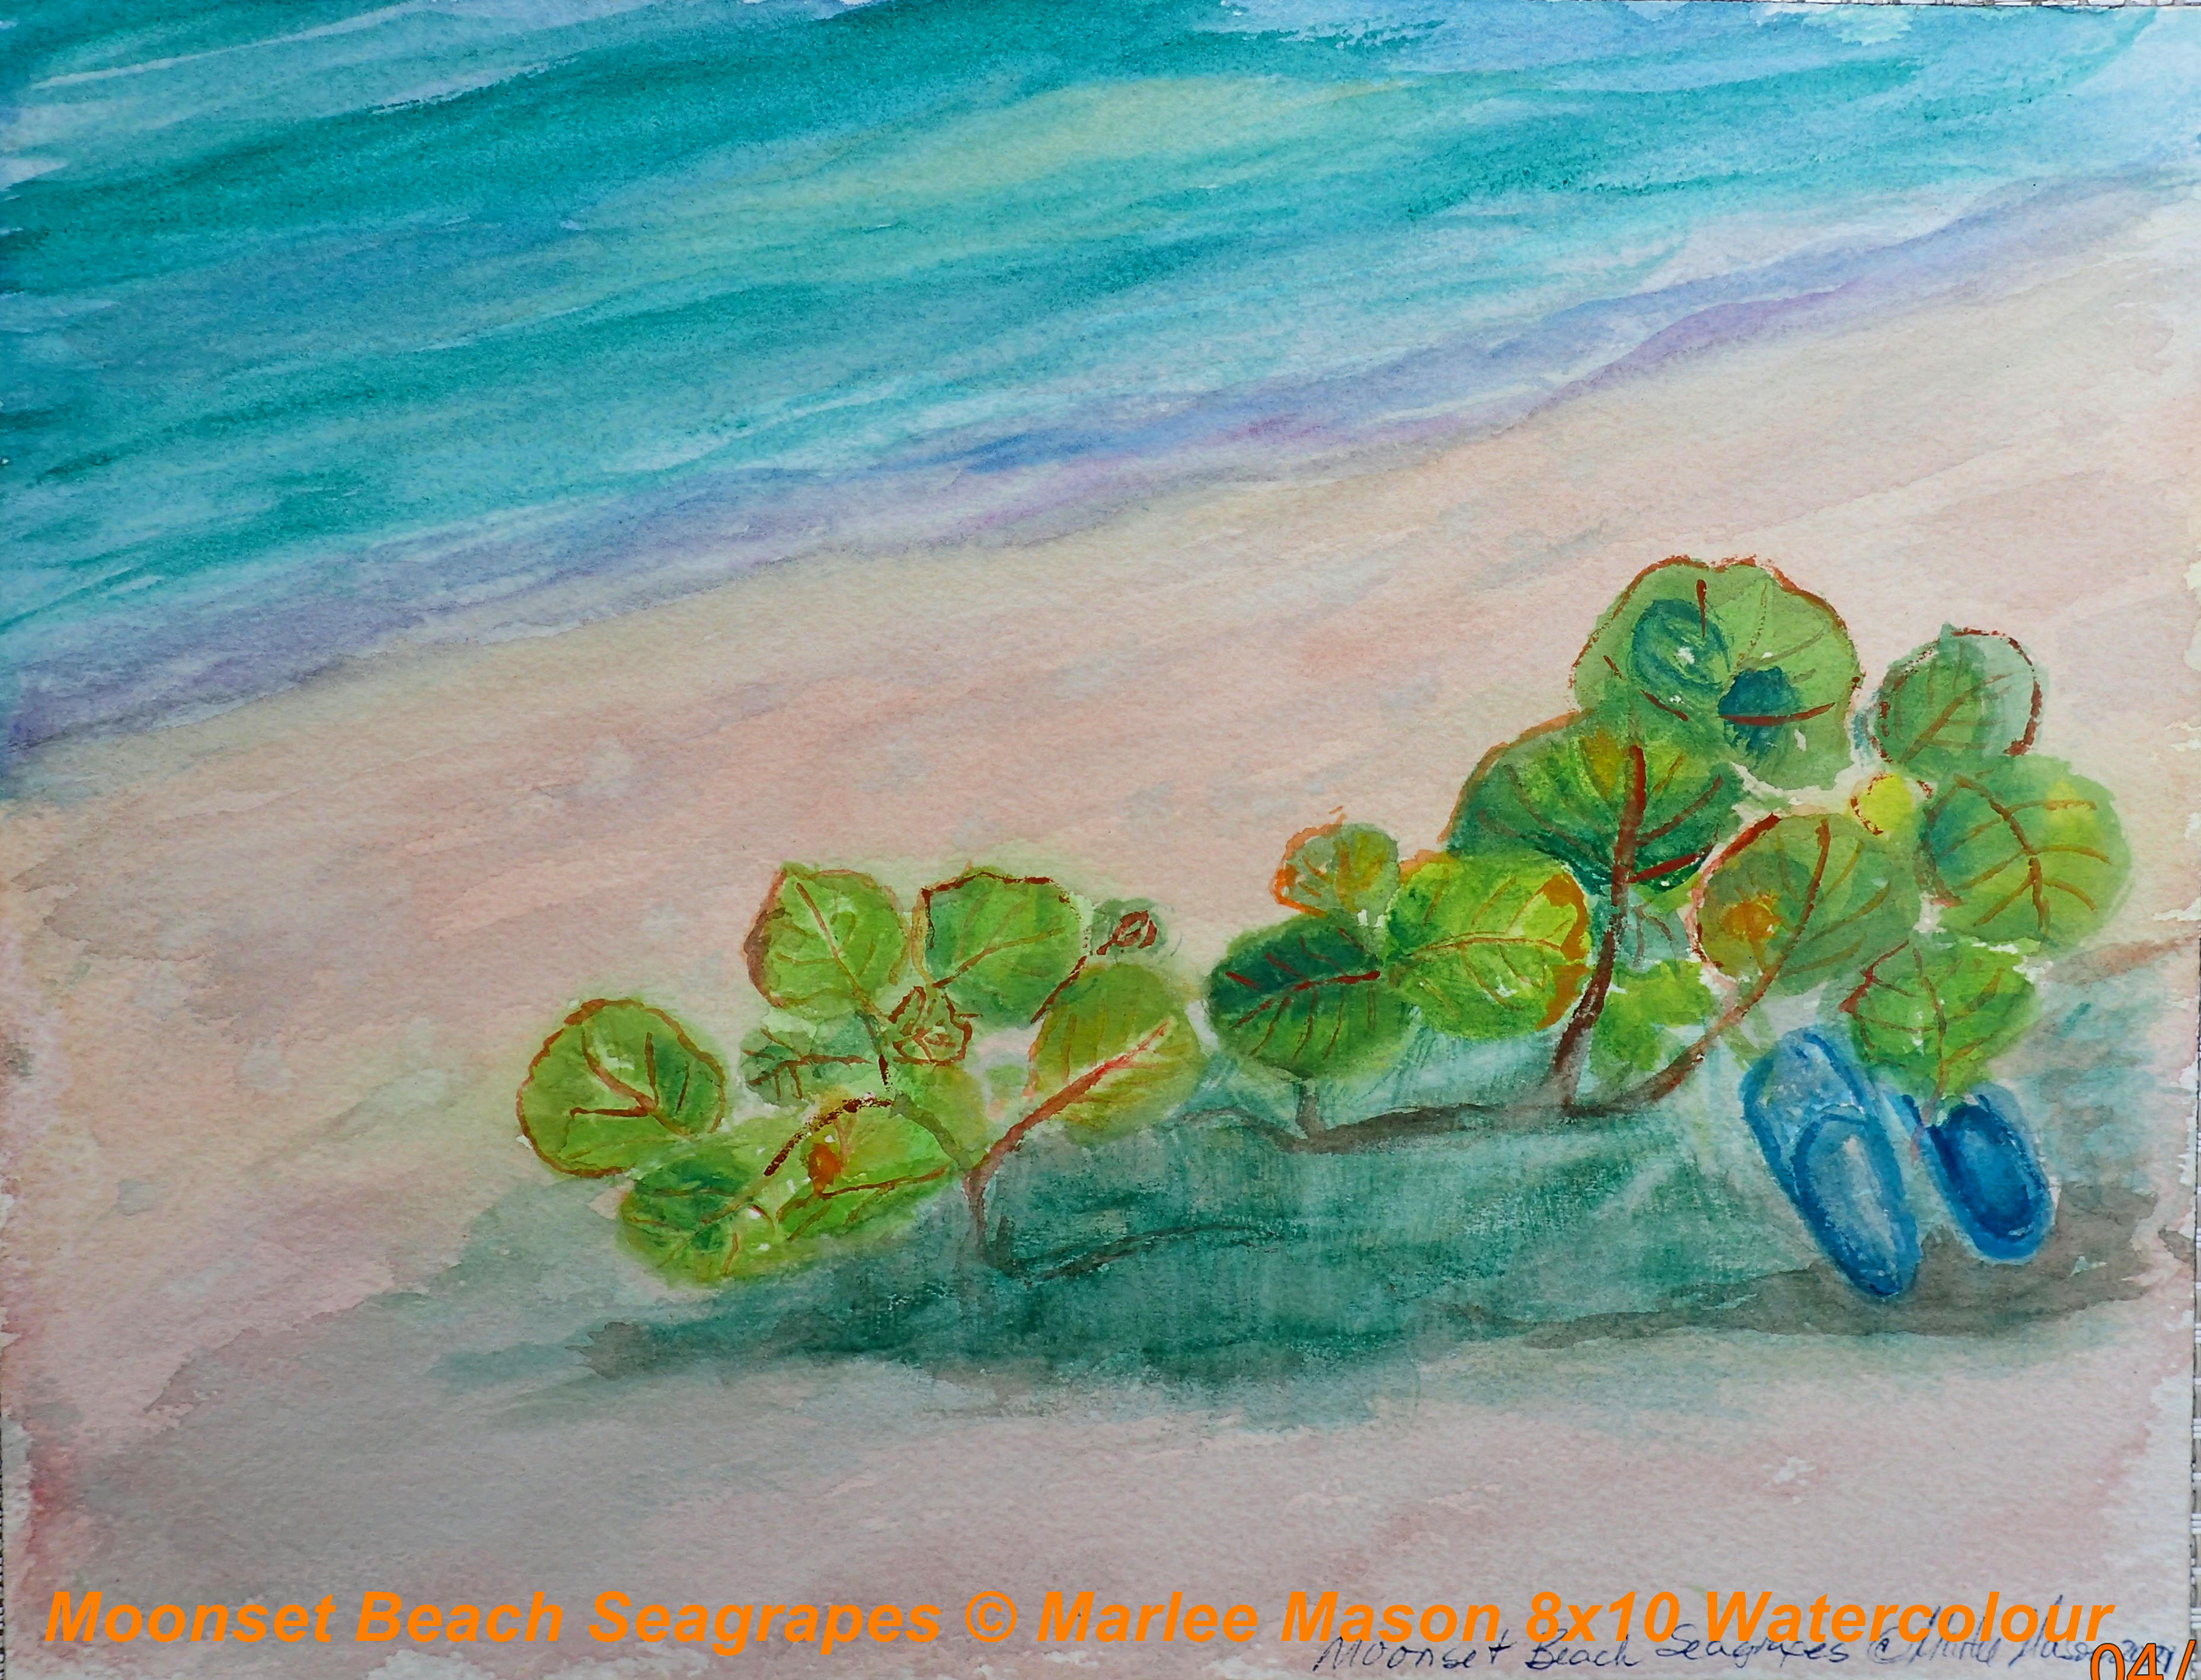 From my private beach on Lubbers this watercolour plein air painting captures the new growth of seagrapes on the dune recovering a foothold after the hurricane.   Painted and water protected on Arches